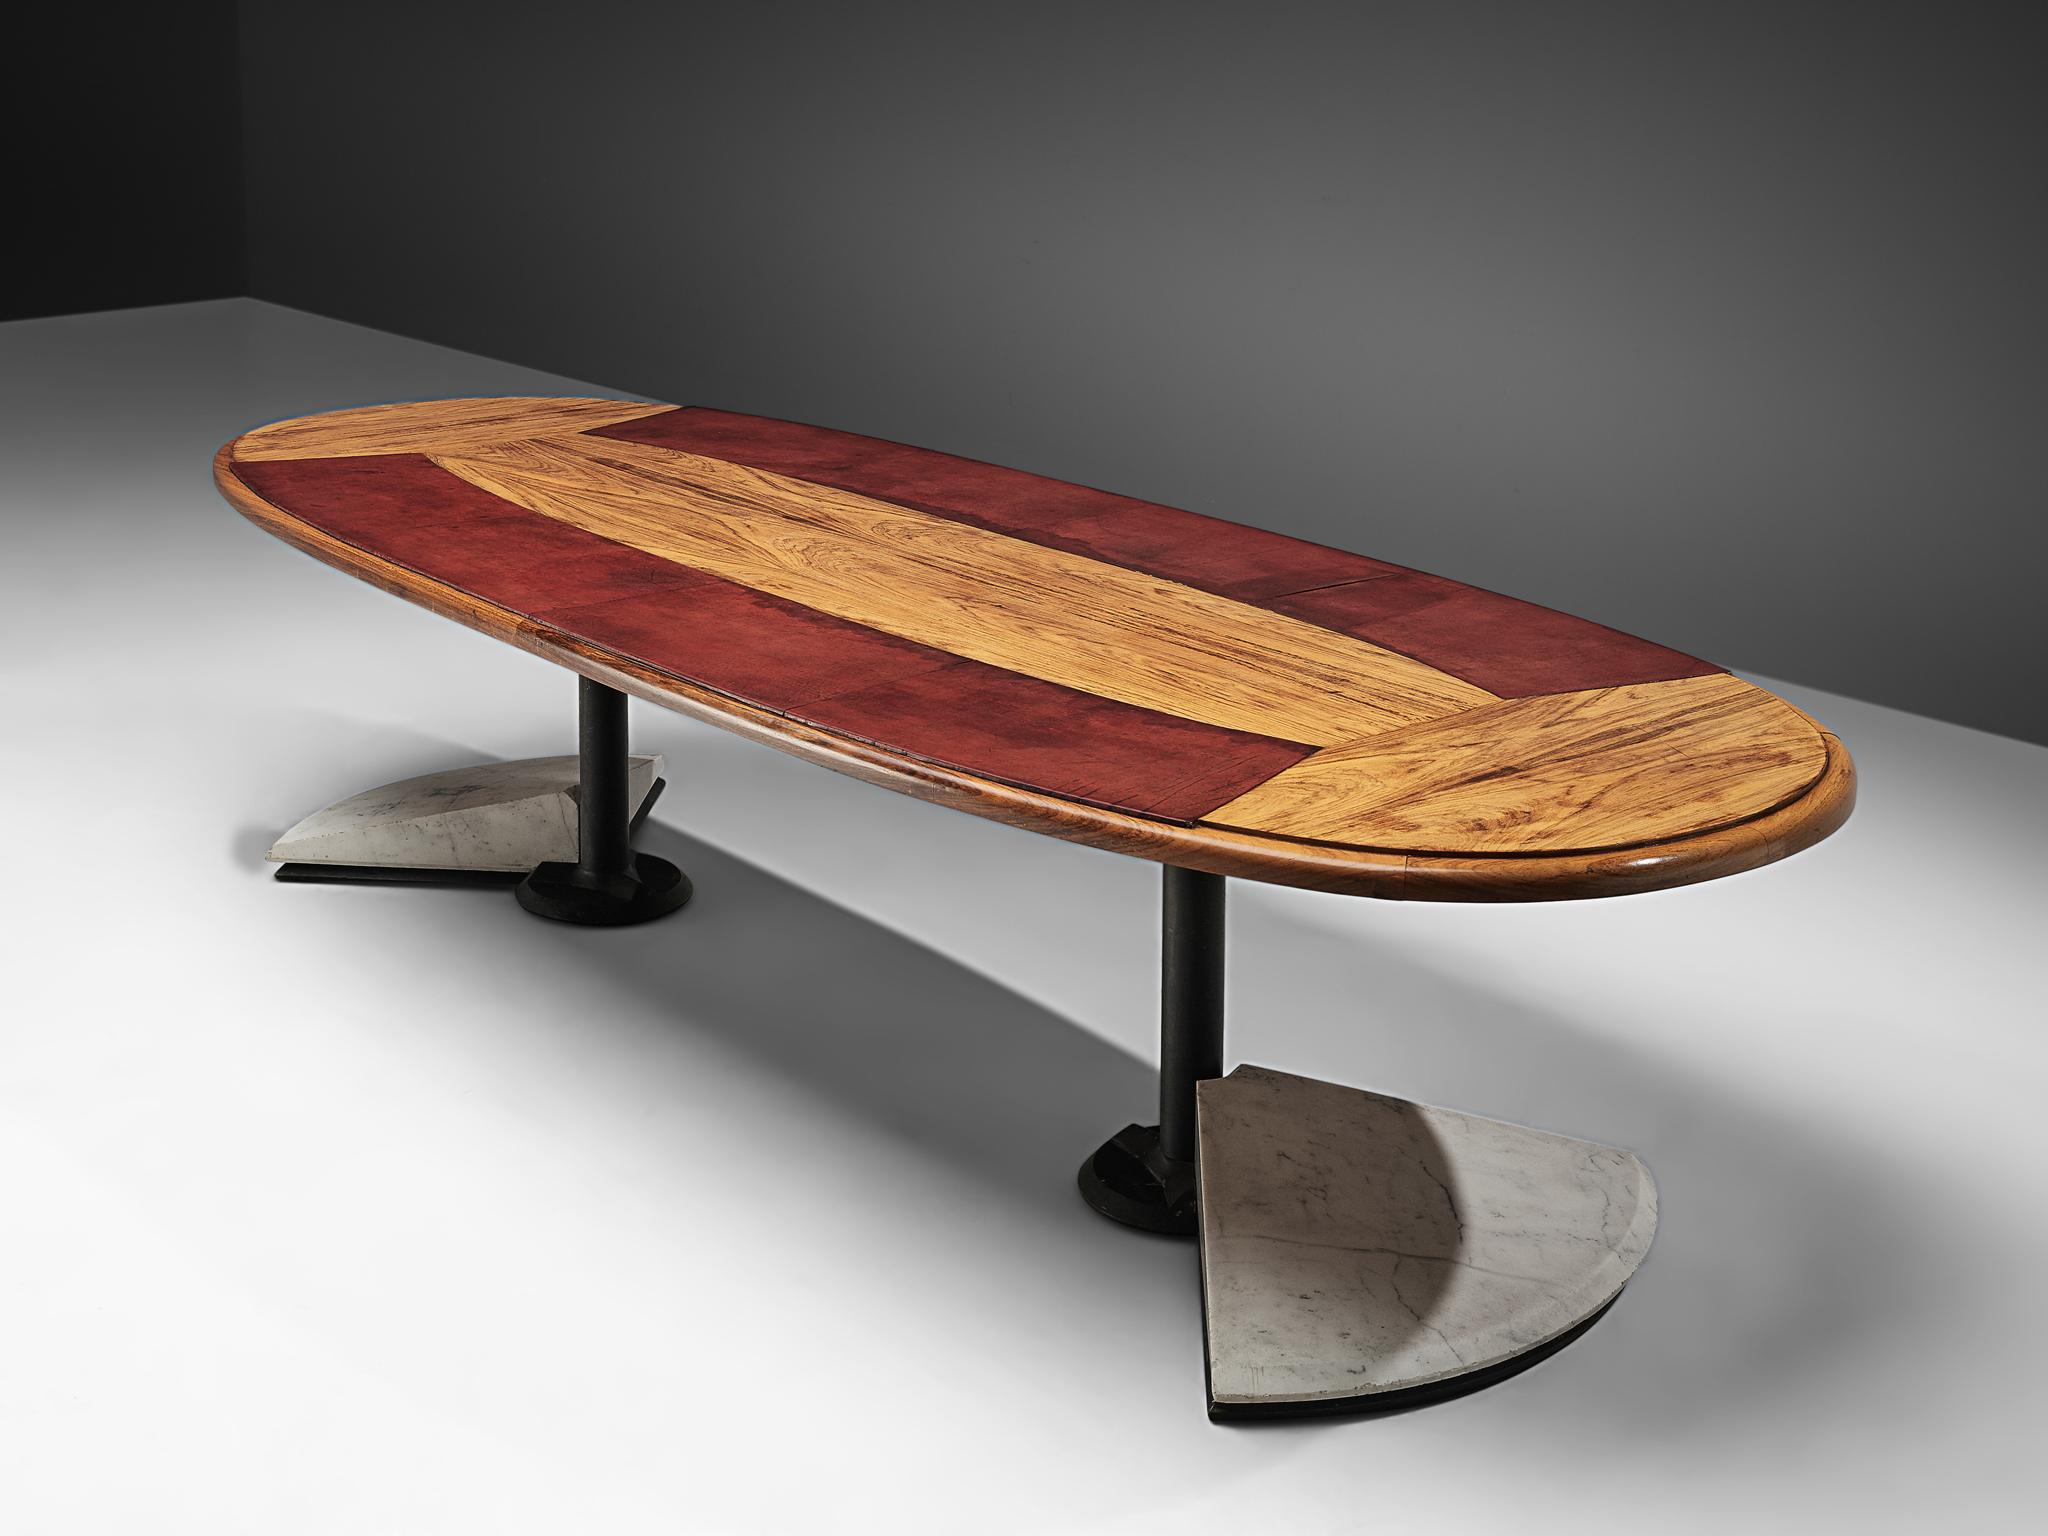 Conference table, Carrara marble, walnut, iron, Italy, 1970s. 

This captivating oval table from Italy serves as an ideal choice for either a conference or a dining setting. It achieves a harmonious whole despite its diverse materials. The